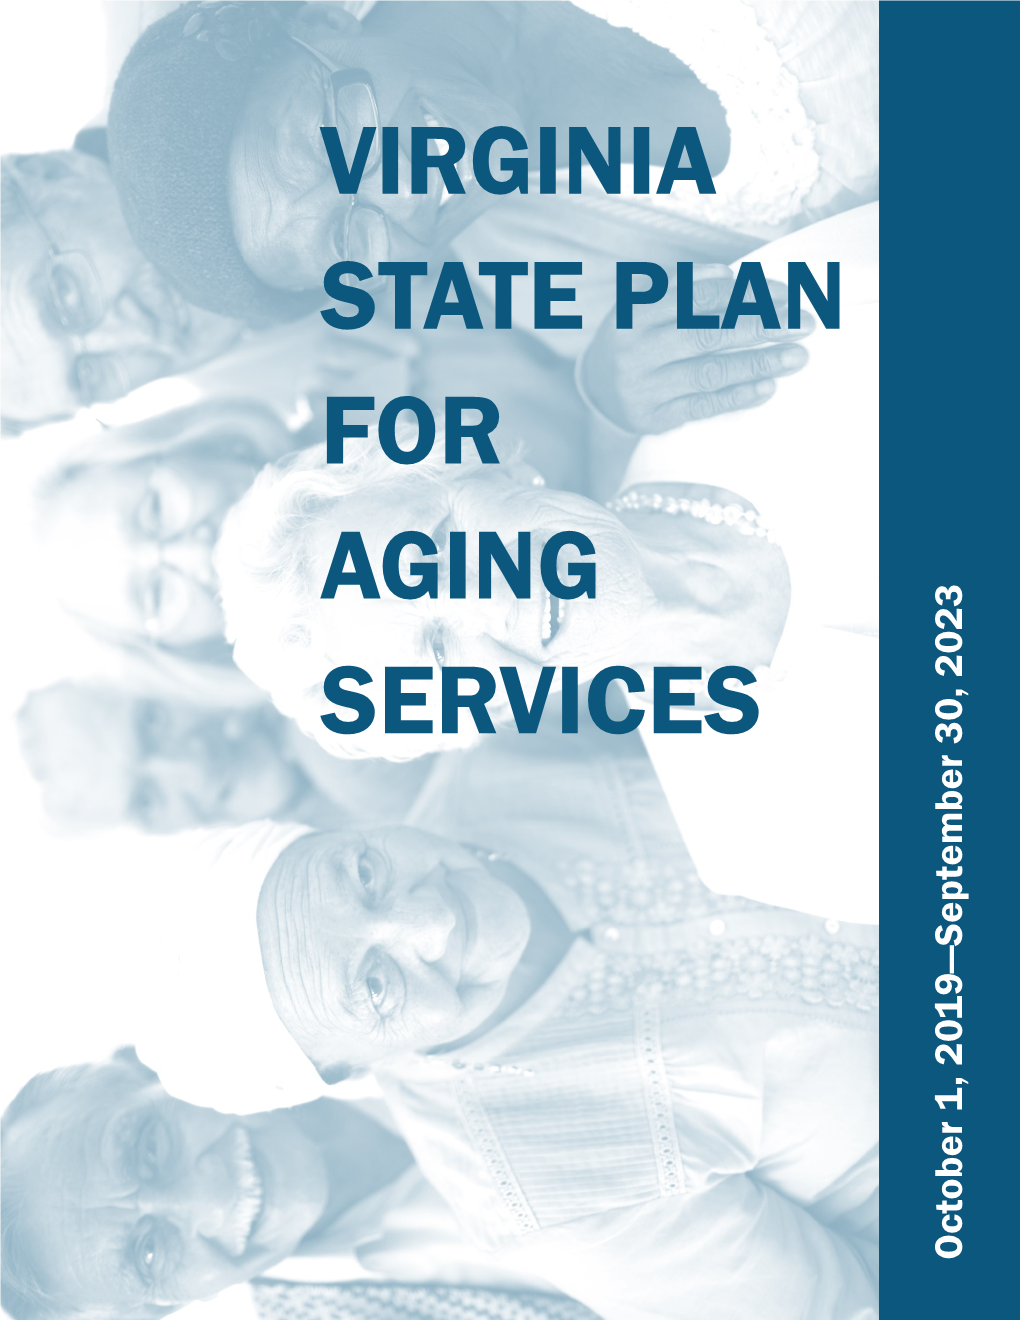 Virginia State Plan for Aging Services (October 1, 2019 to September 30, 2023)